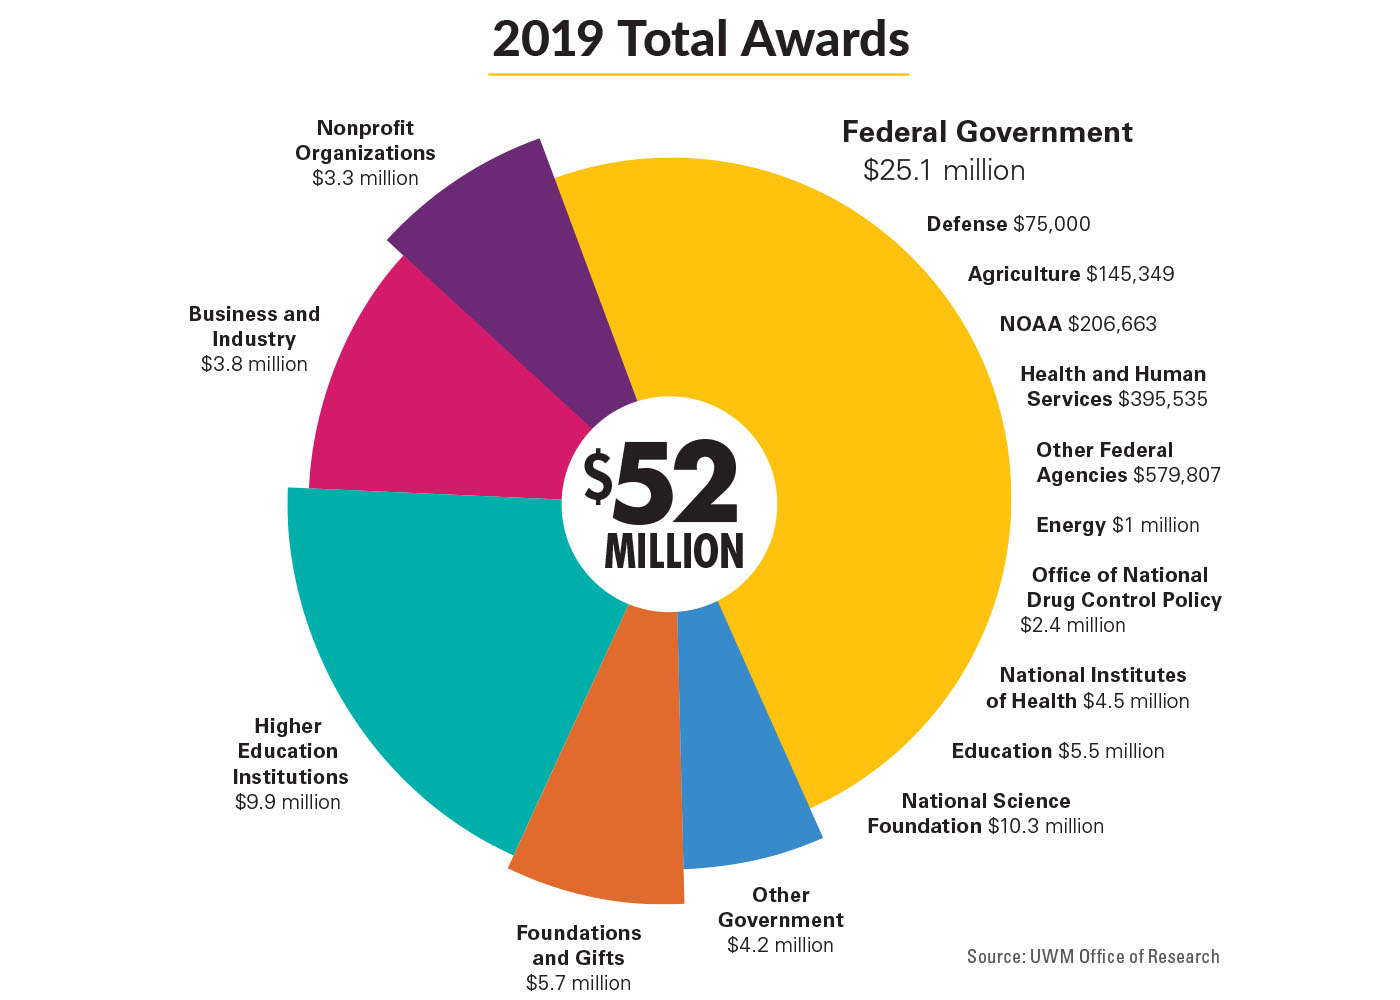 Graphic shows 2019 research awards, broken down by funding agency.